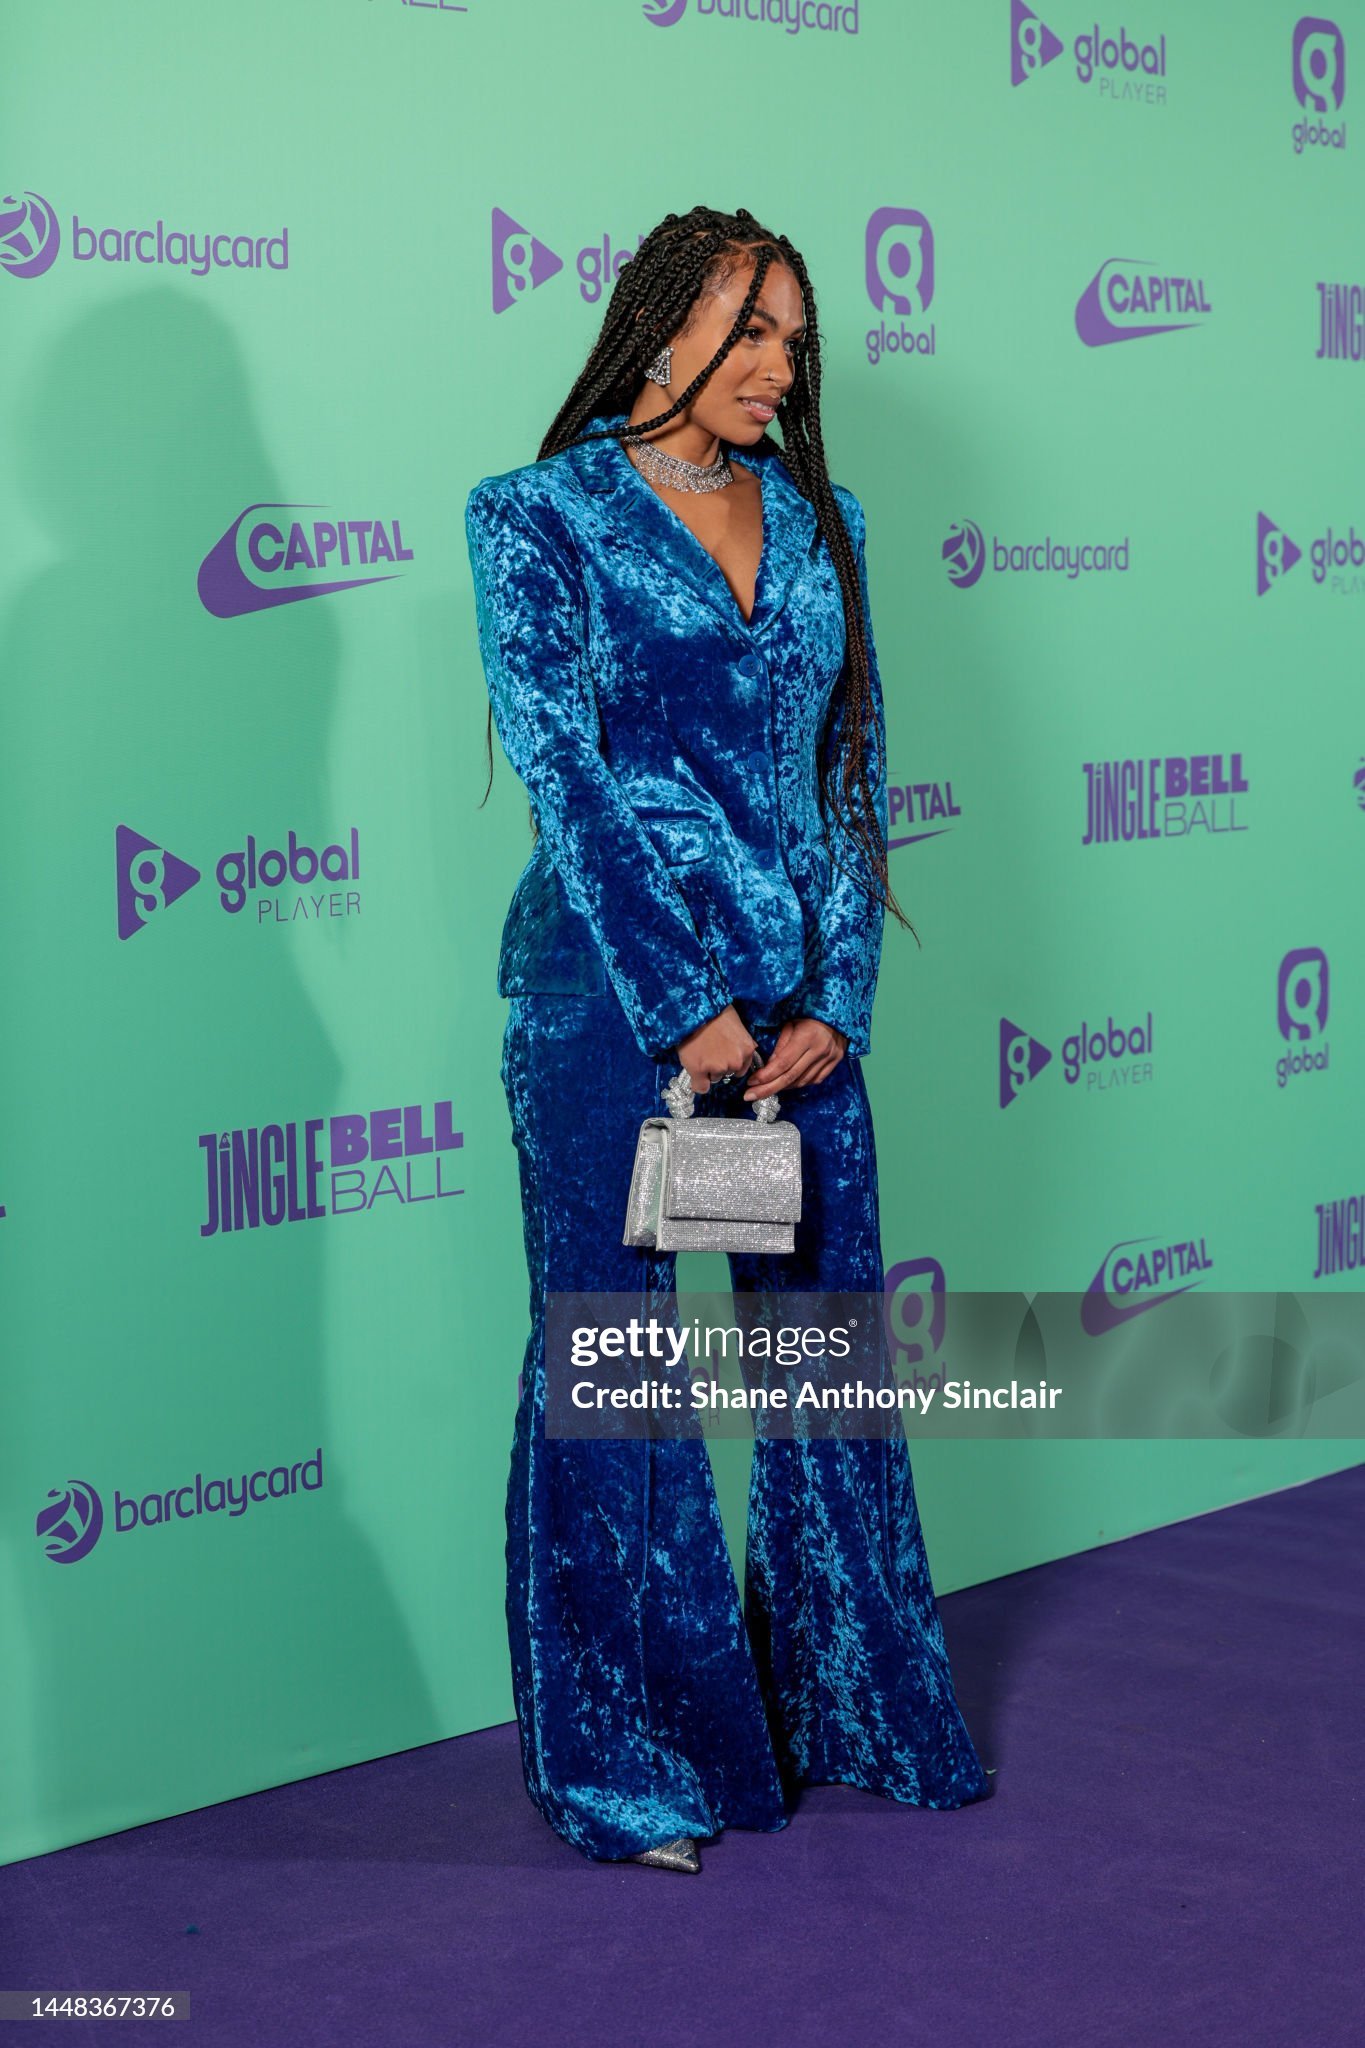 gettyimages-1448367376-2048x2048.jpg